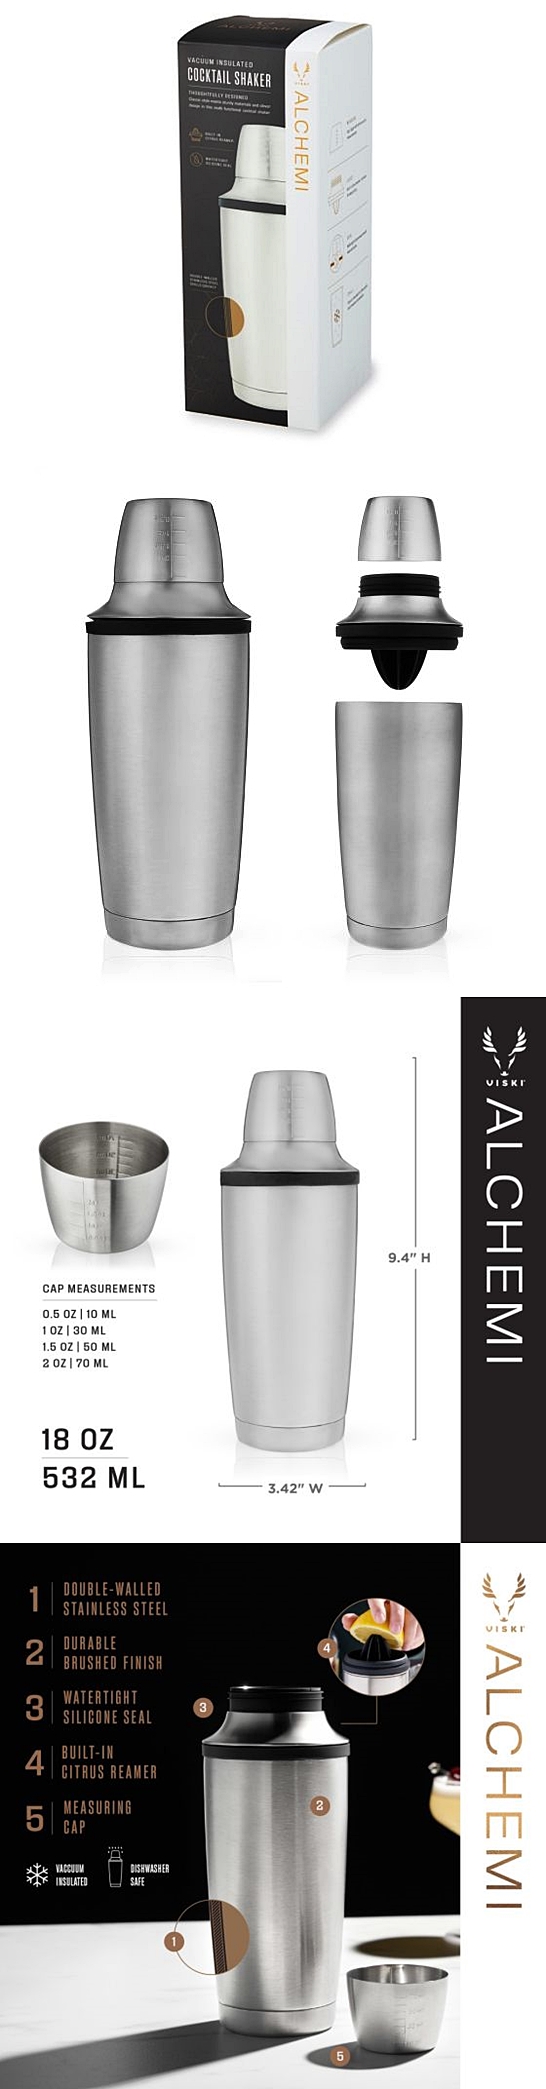 Alchemi Vacuum-Insulated Cocktail Shaker with Citrus Reamer by VISKI